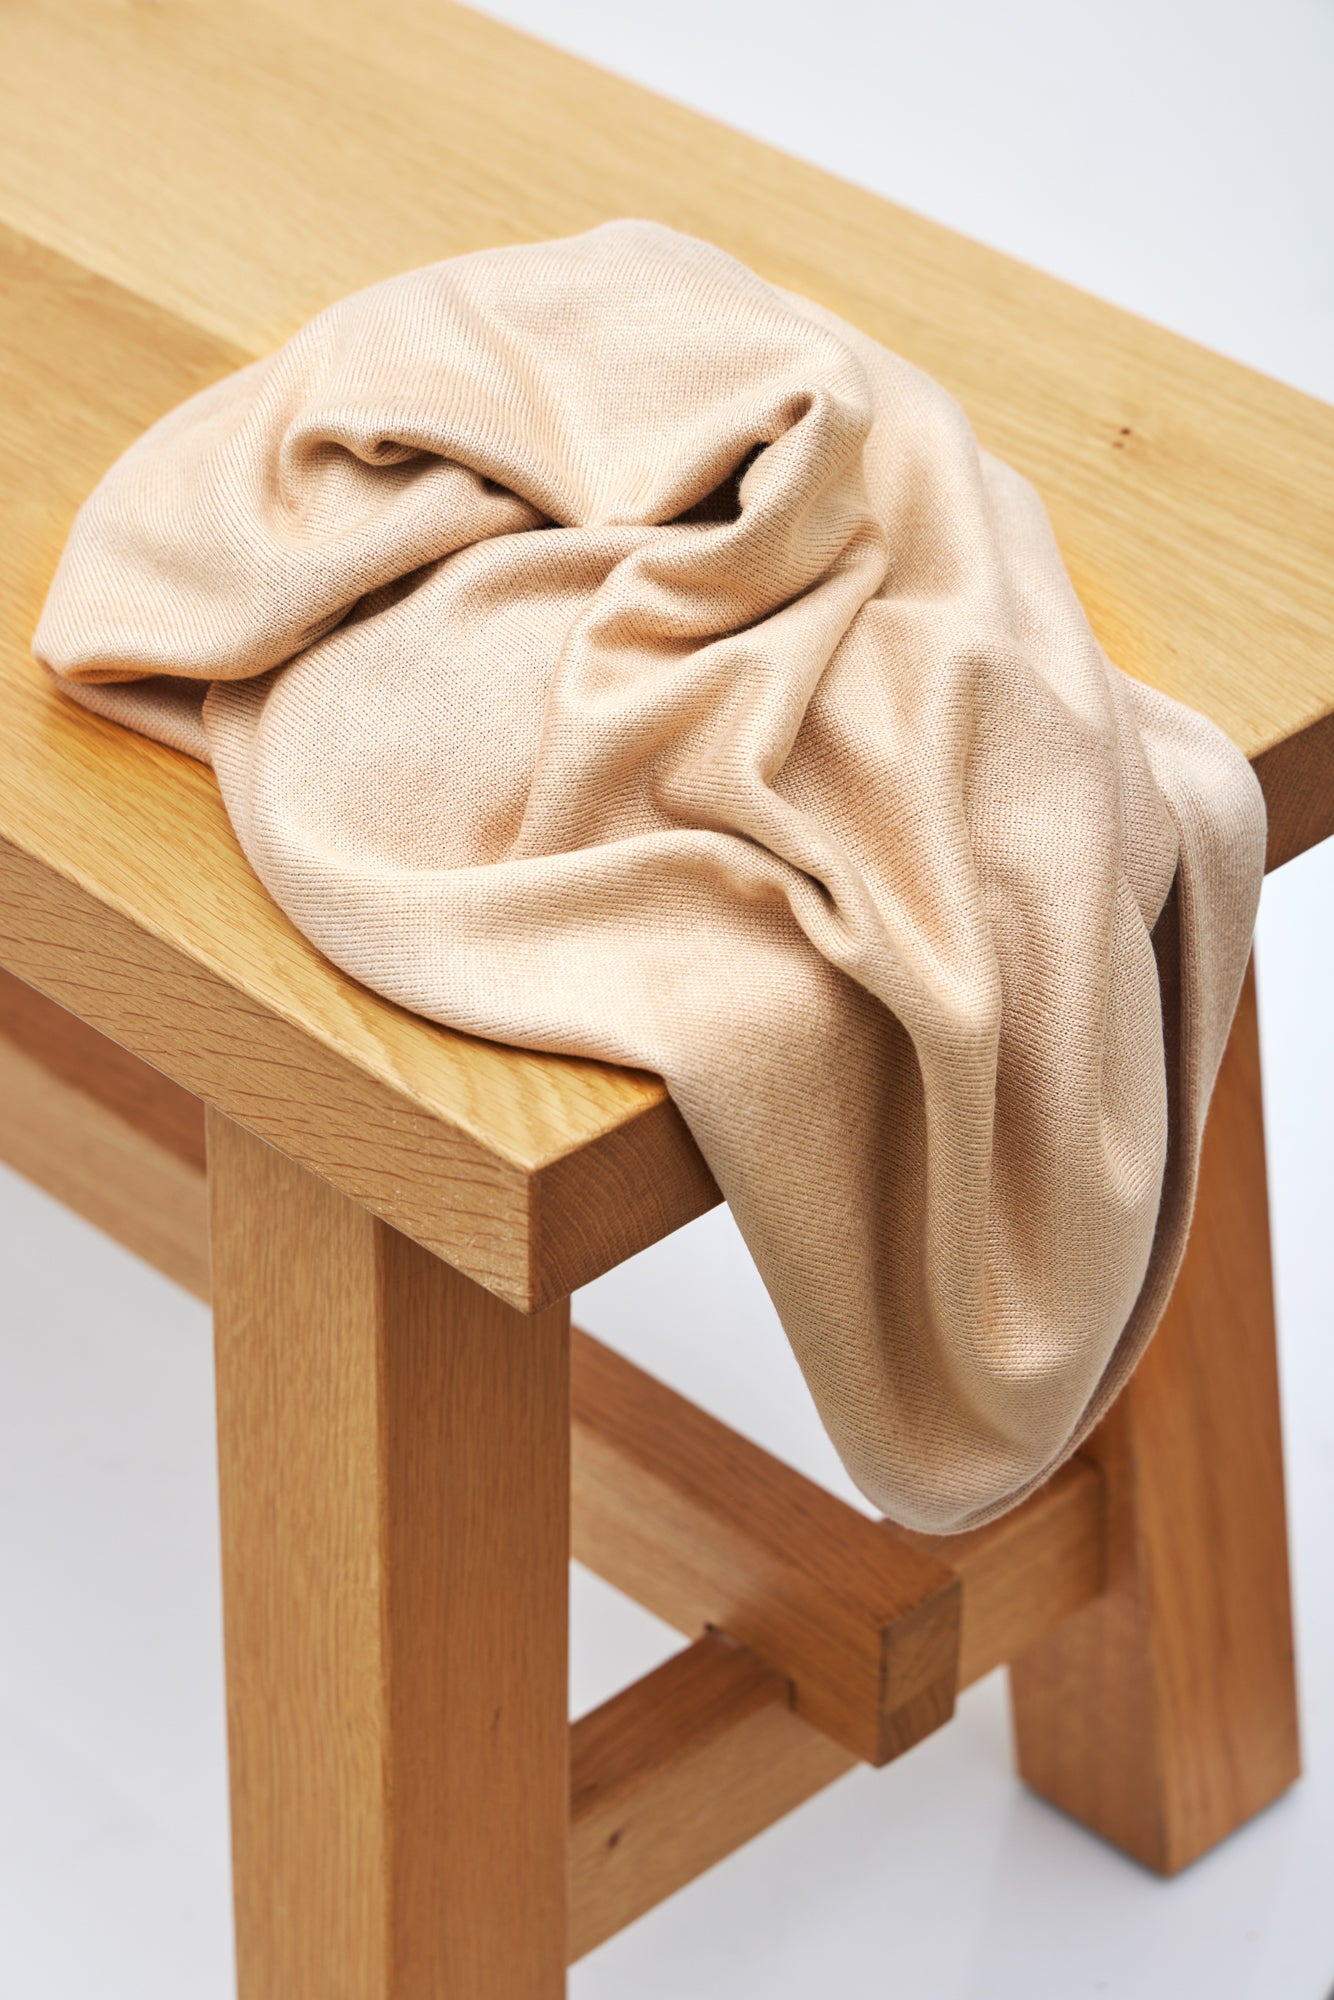 Warm sand (beige) Ecovero knit sewing fabric draped over wooden bench